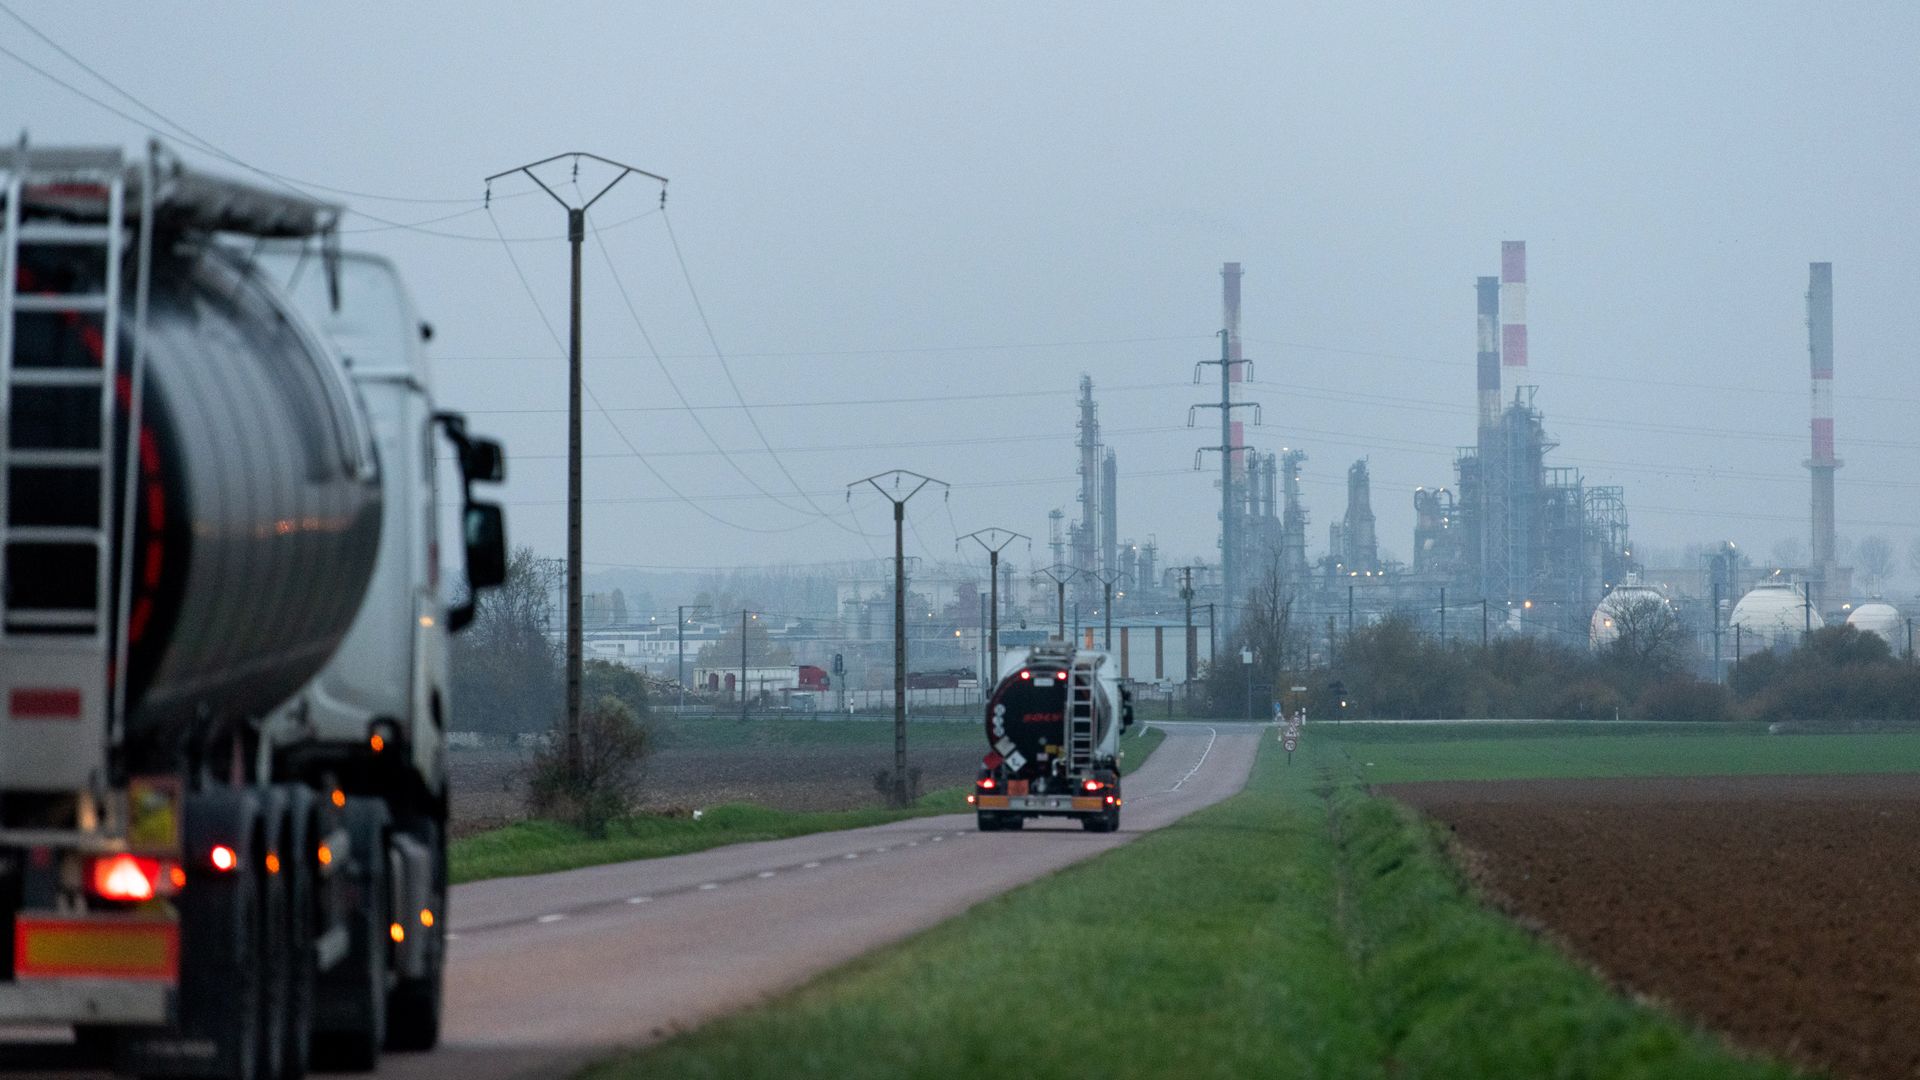 A French oil refinery